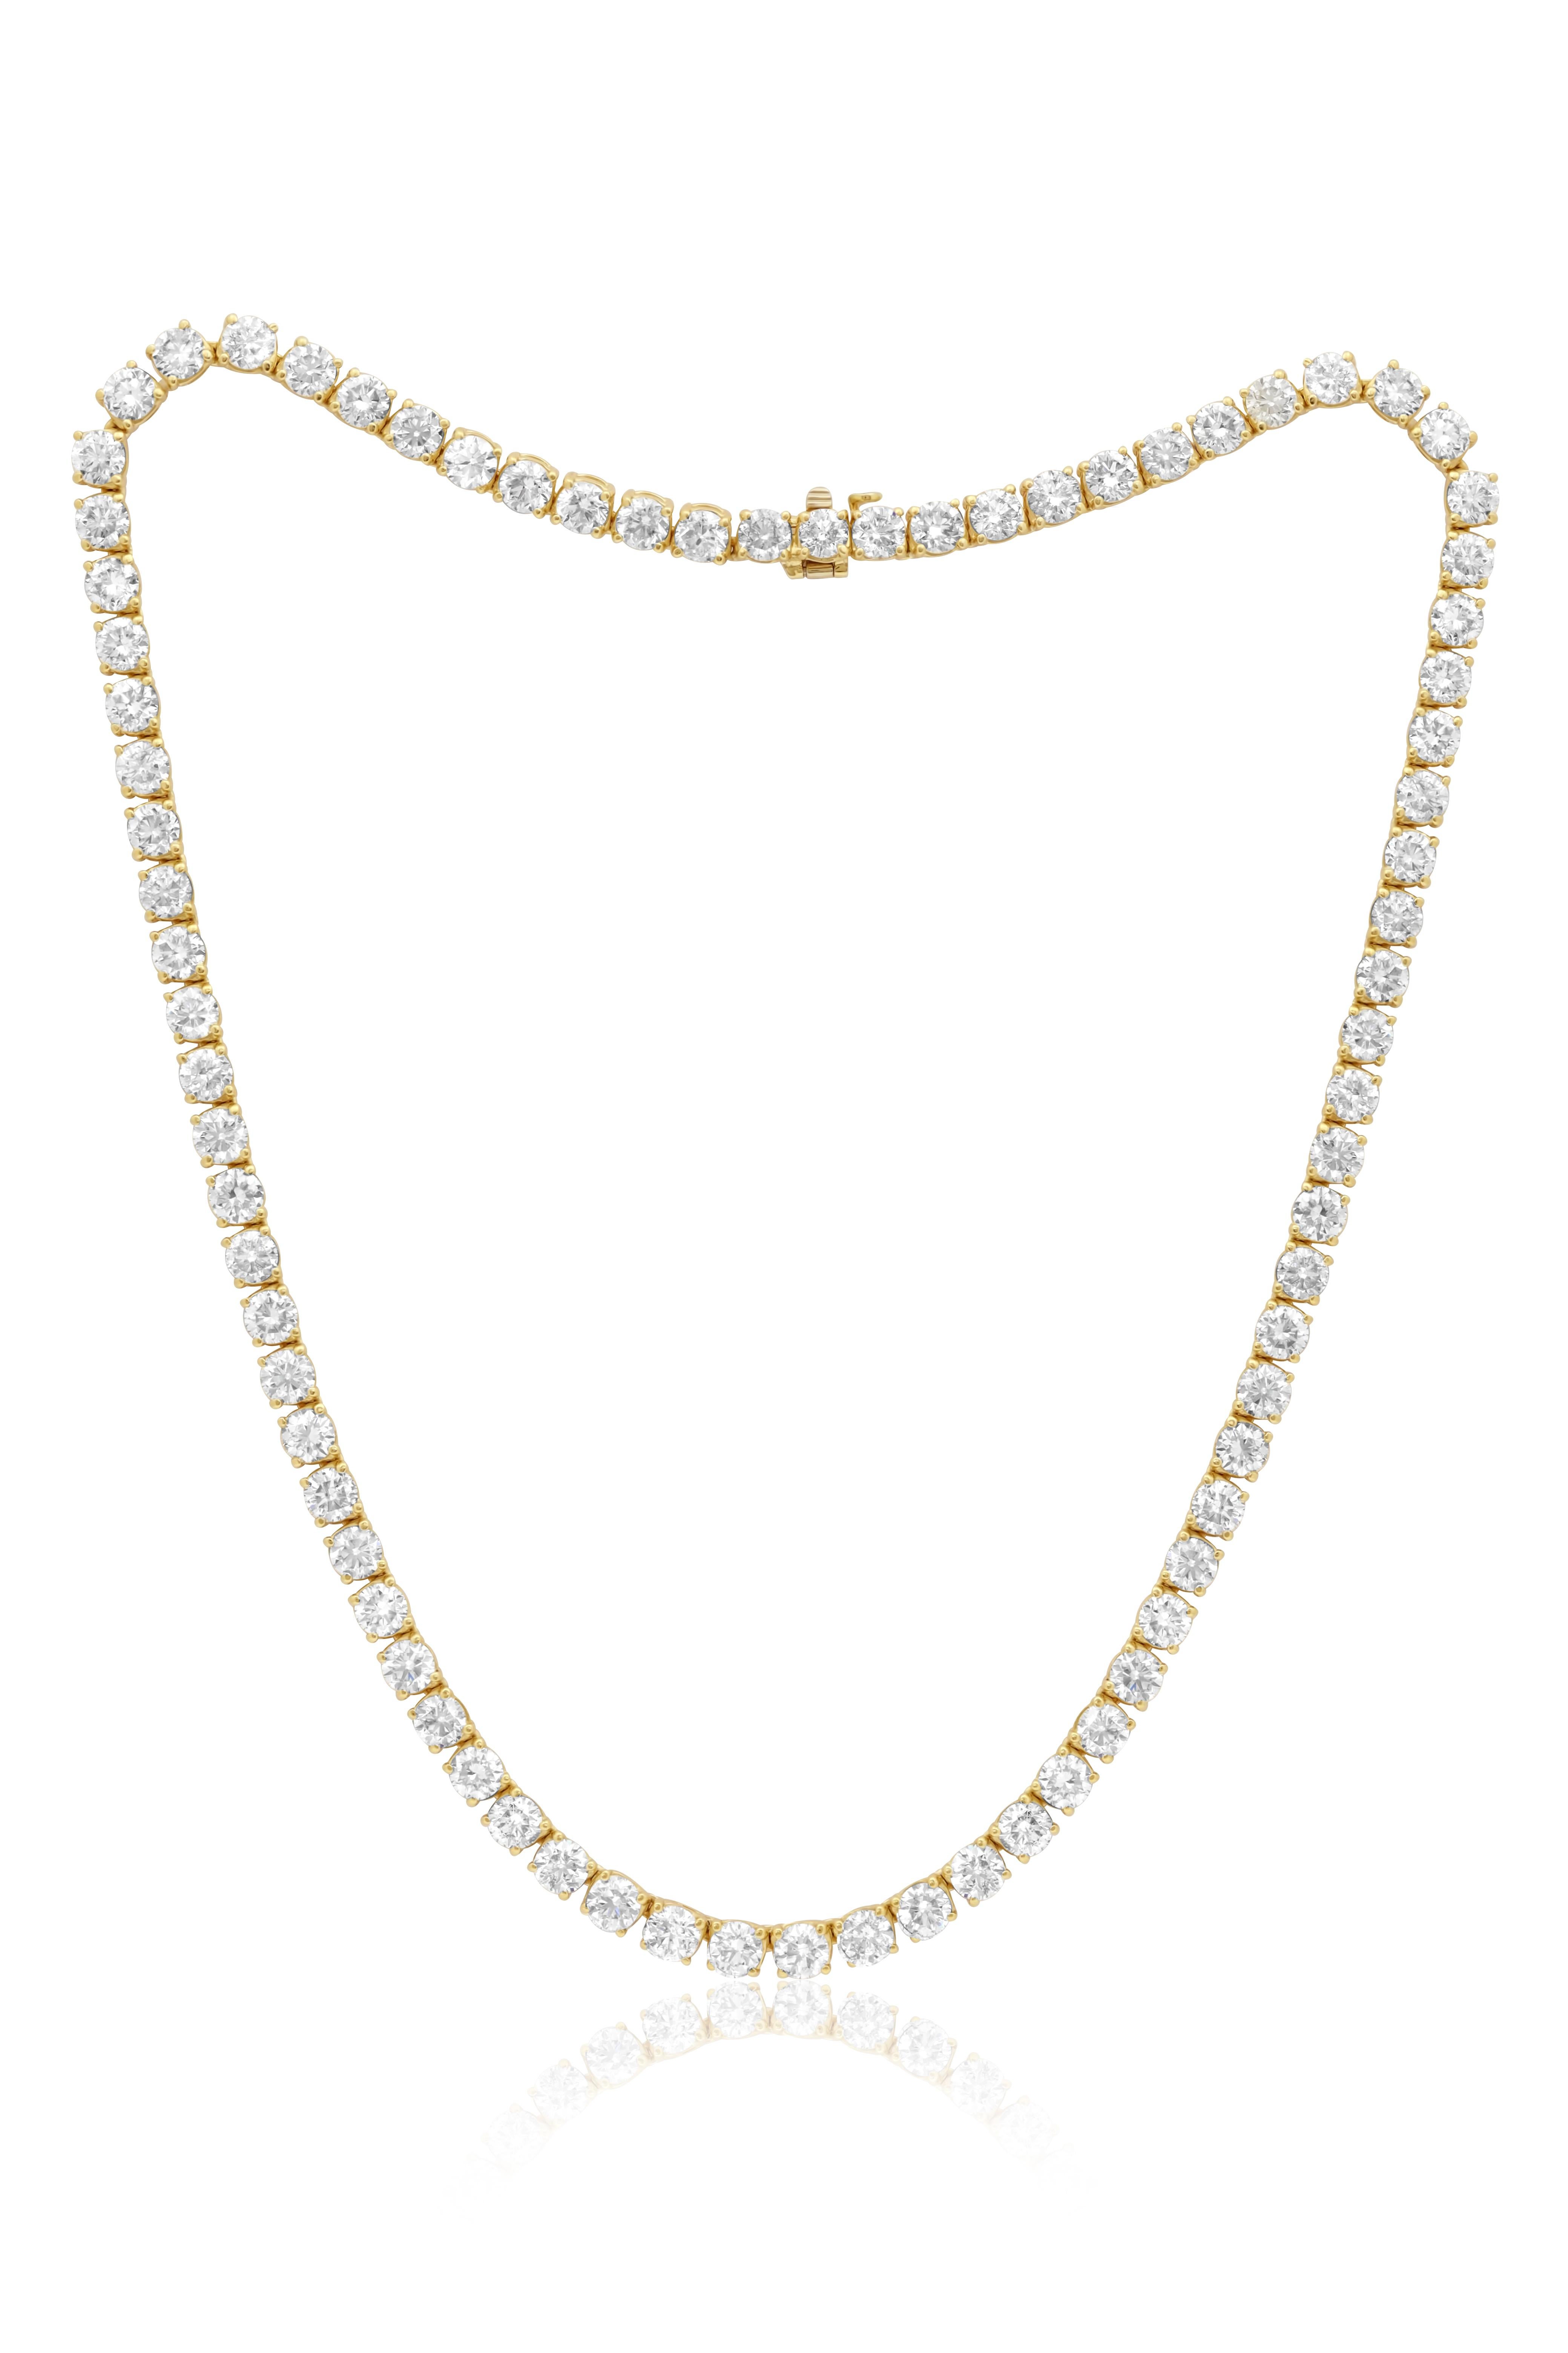 Round Cut Diana M. Custom 31.50 Cts 4 Prong Round  Diamond 18k Yellow Gold Tennis Necklace For Sale